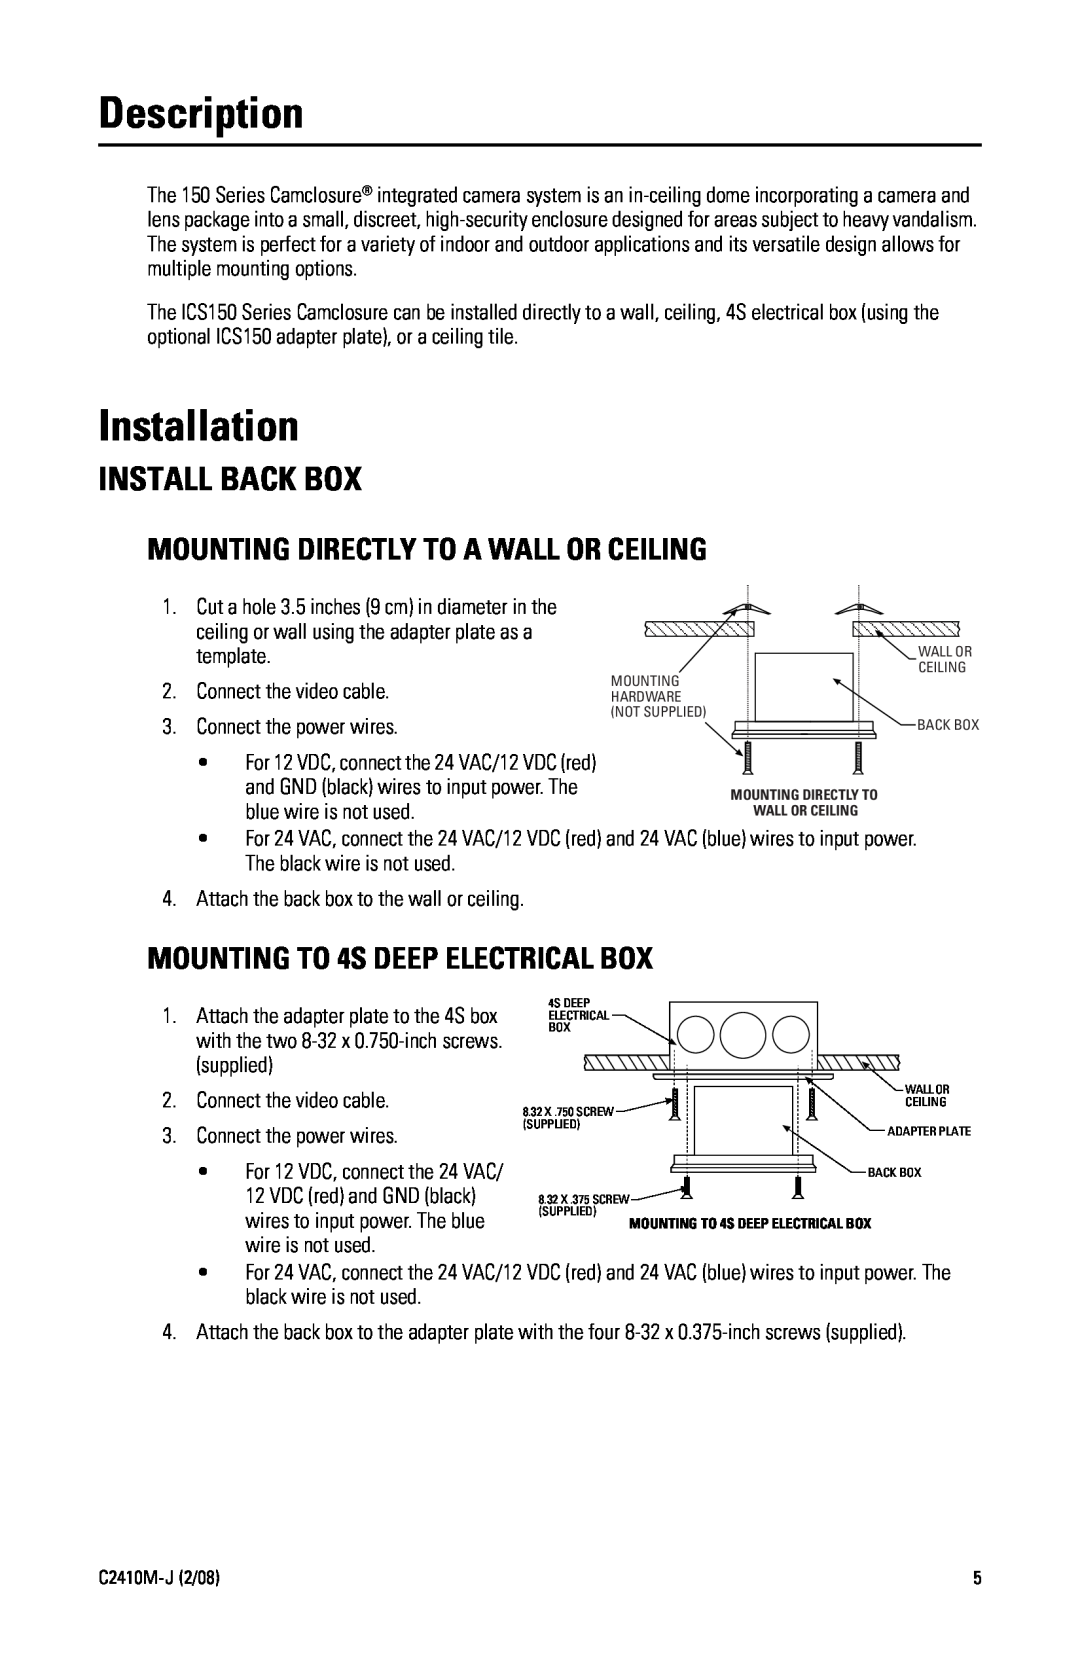 Pelco C2410M-J manual Description, Installation, Install Back Box, Mounting Directly To A Wall Or Ceiling 